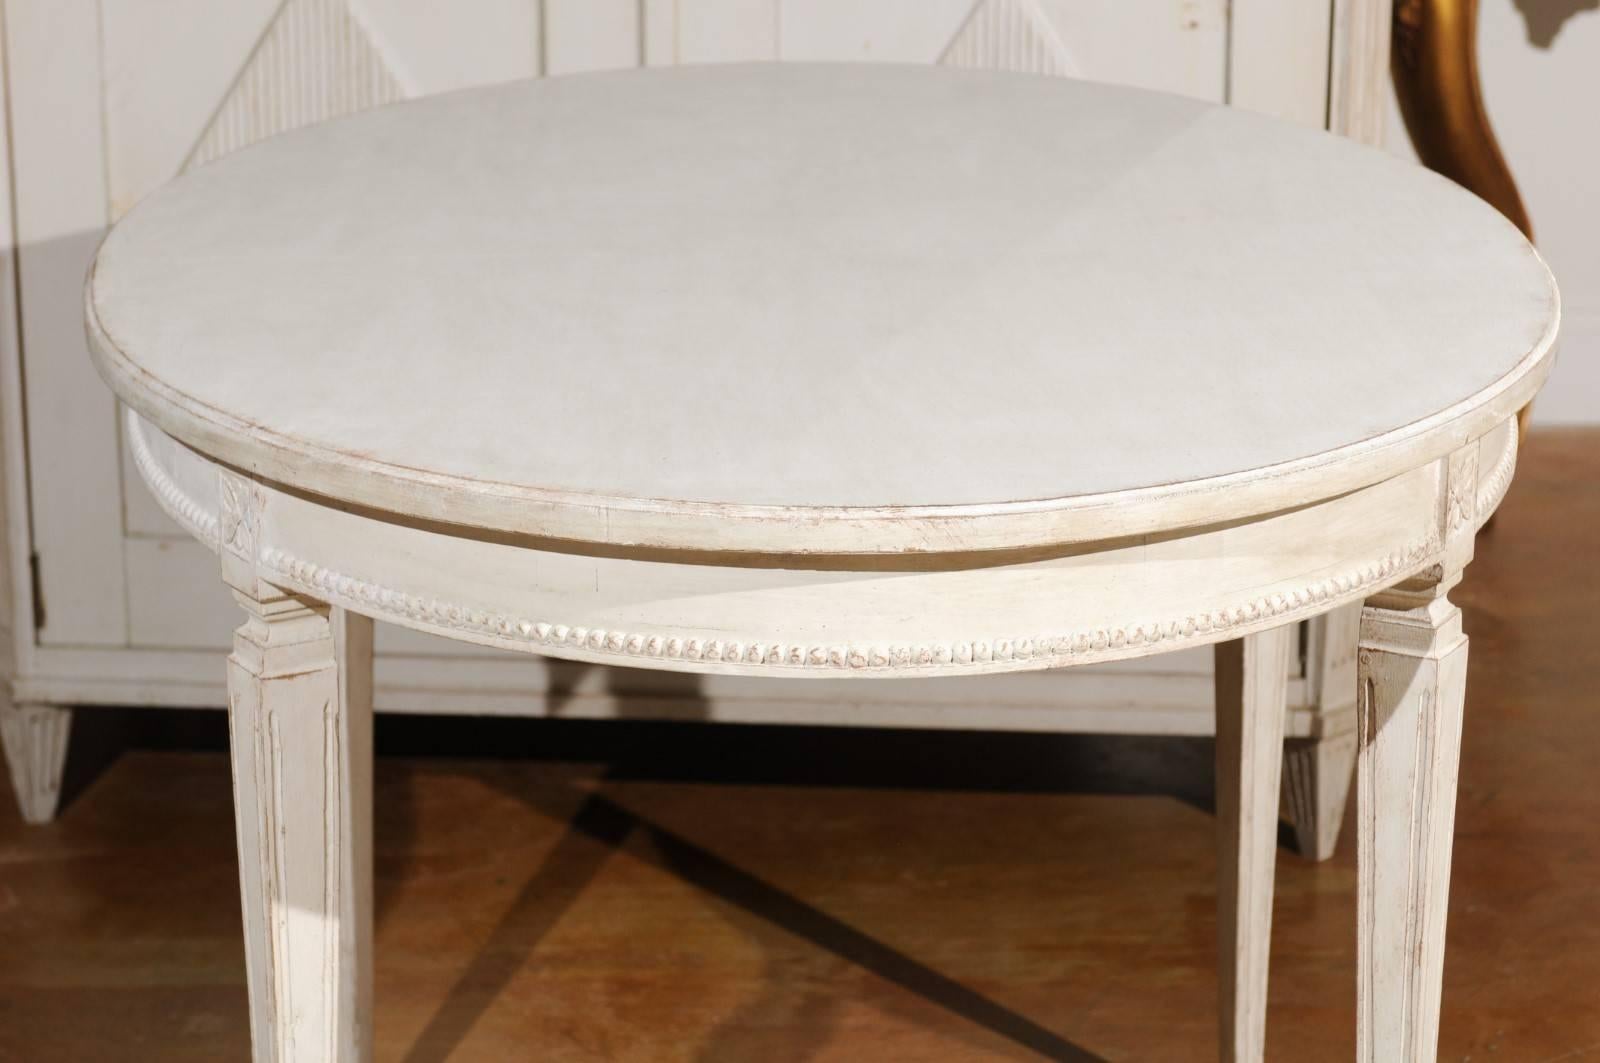 Gustavian Style 1900s Swedish Painted Oval Table from Växjö with Beaded Motifs 3